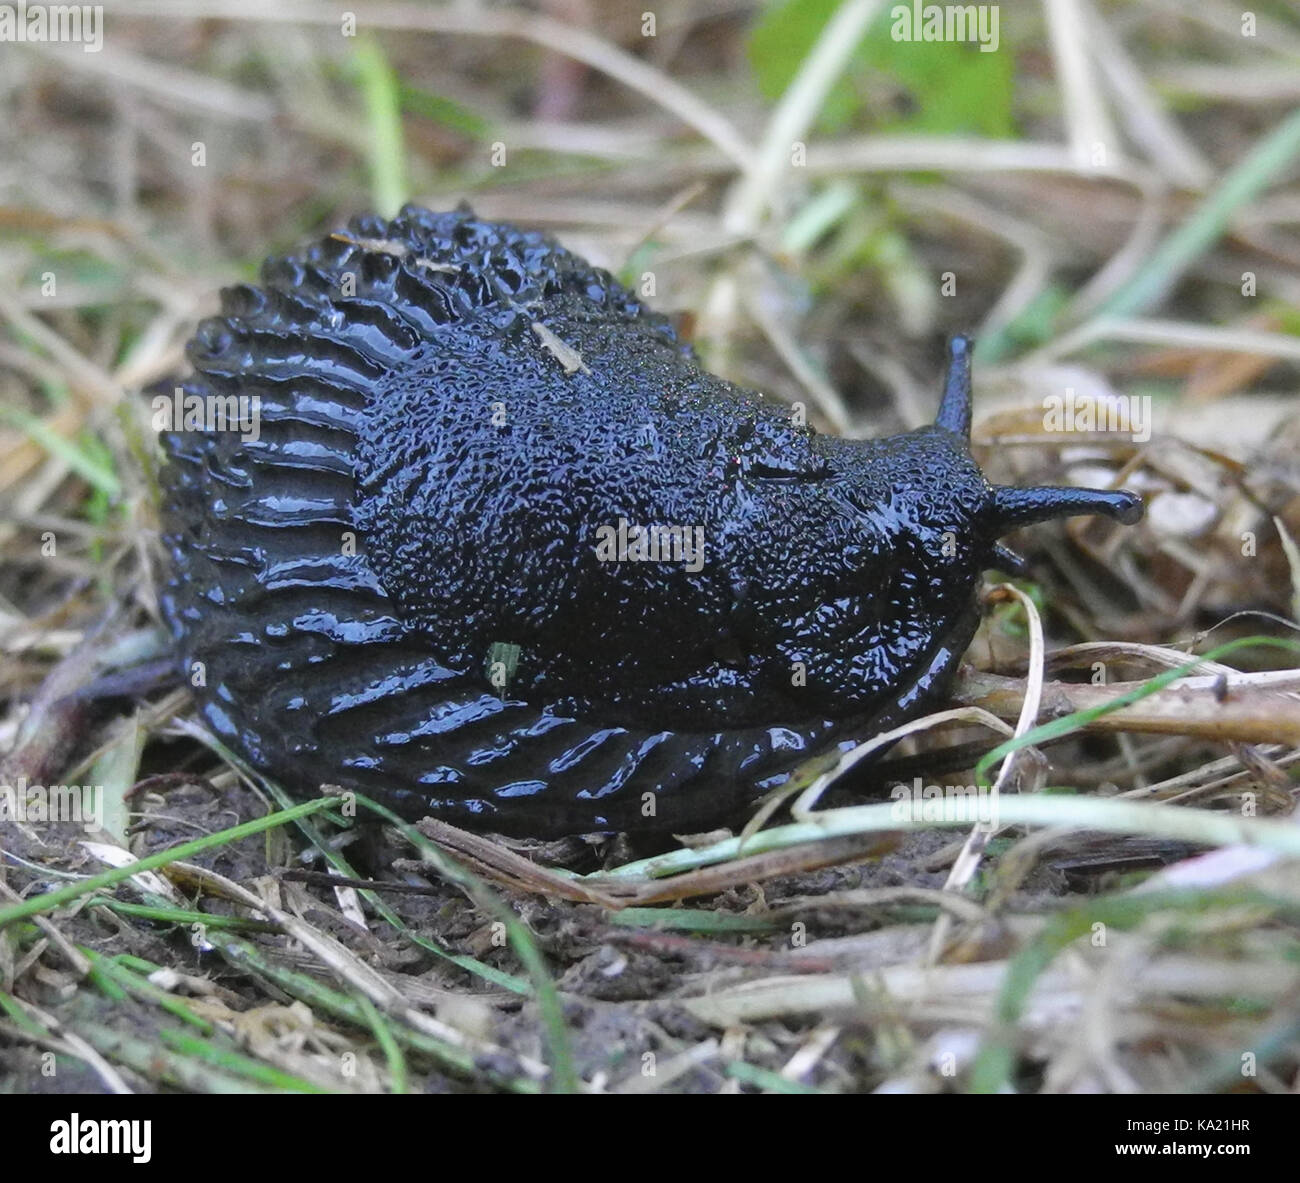 A common garden slug is the black slug - Arion ater - a large gastropod mollusc often seen in gardens and on lawns after rain. Stock Photo